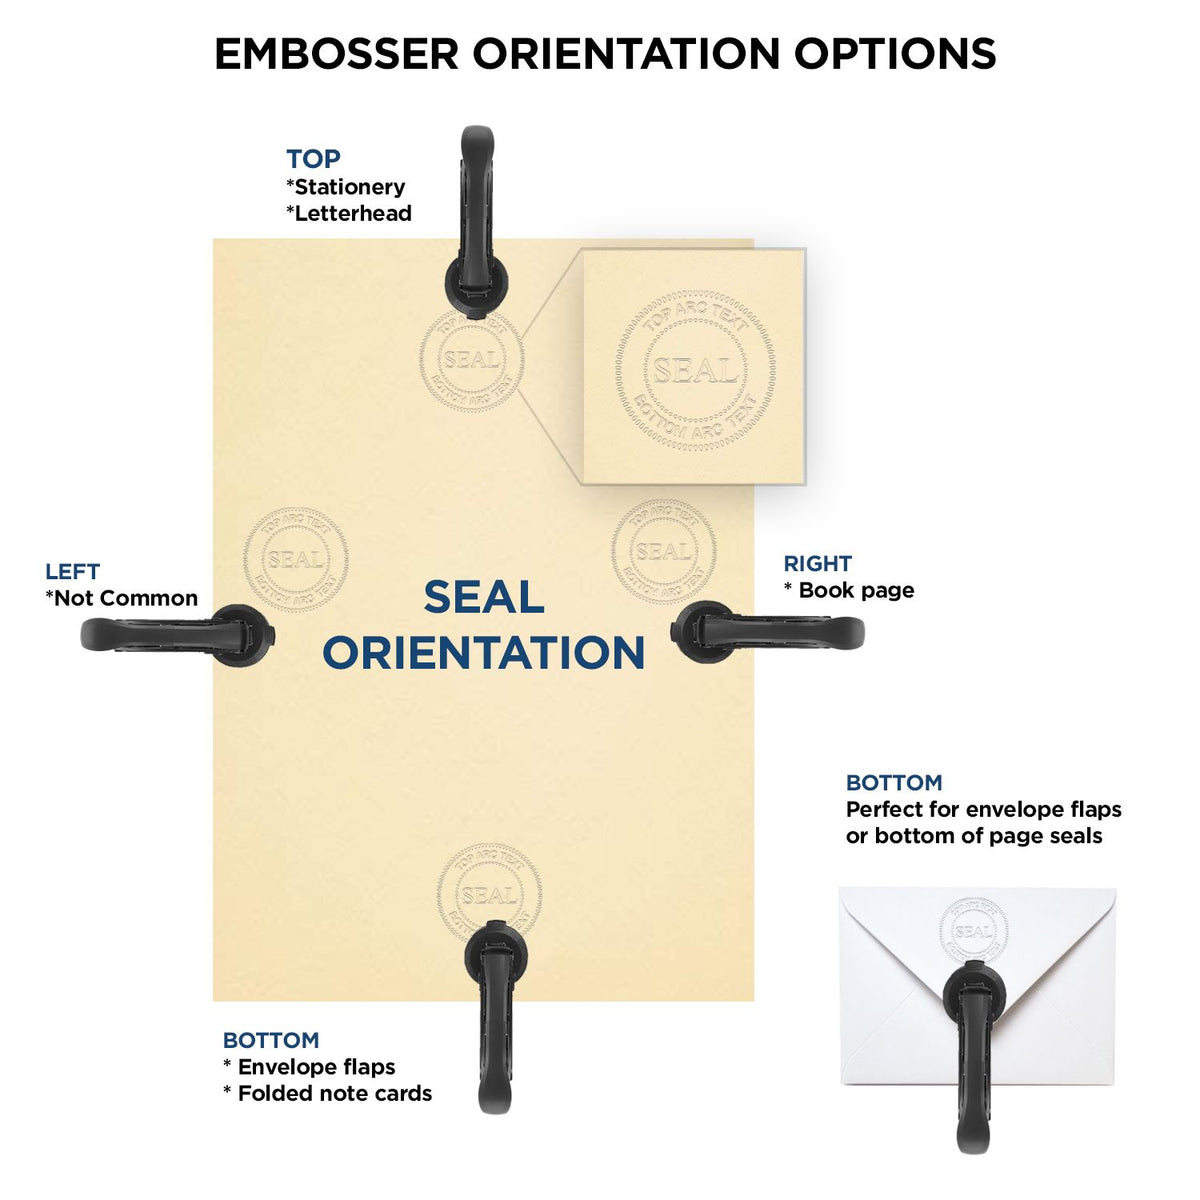 An infographic for the Gift Kentucky Land Surveyor Seal showing embosser orientation, this is showing examples of a top, bottom, right and left insert.